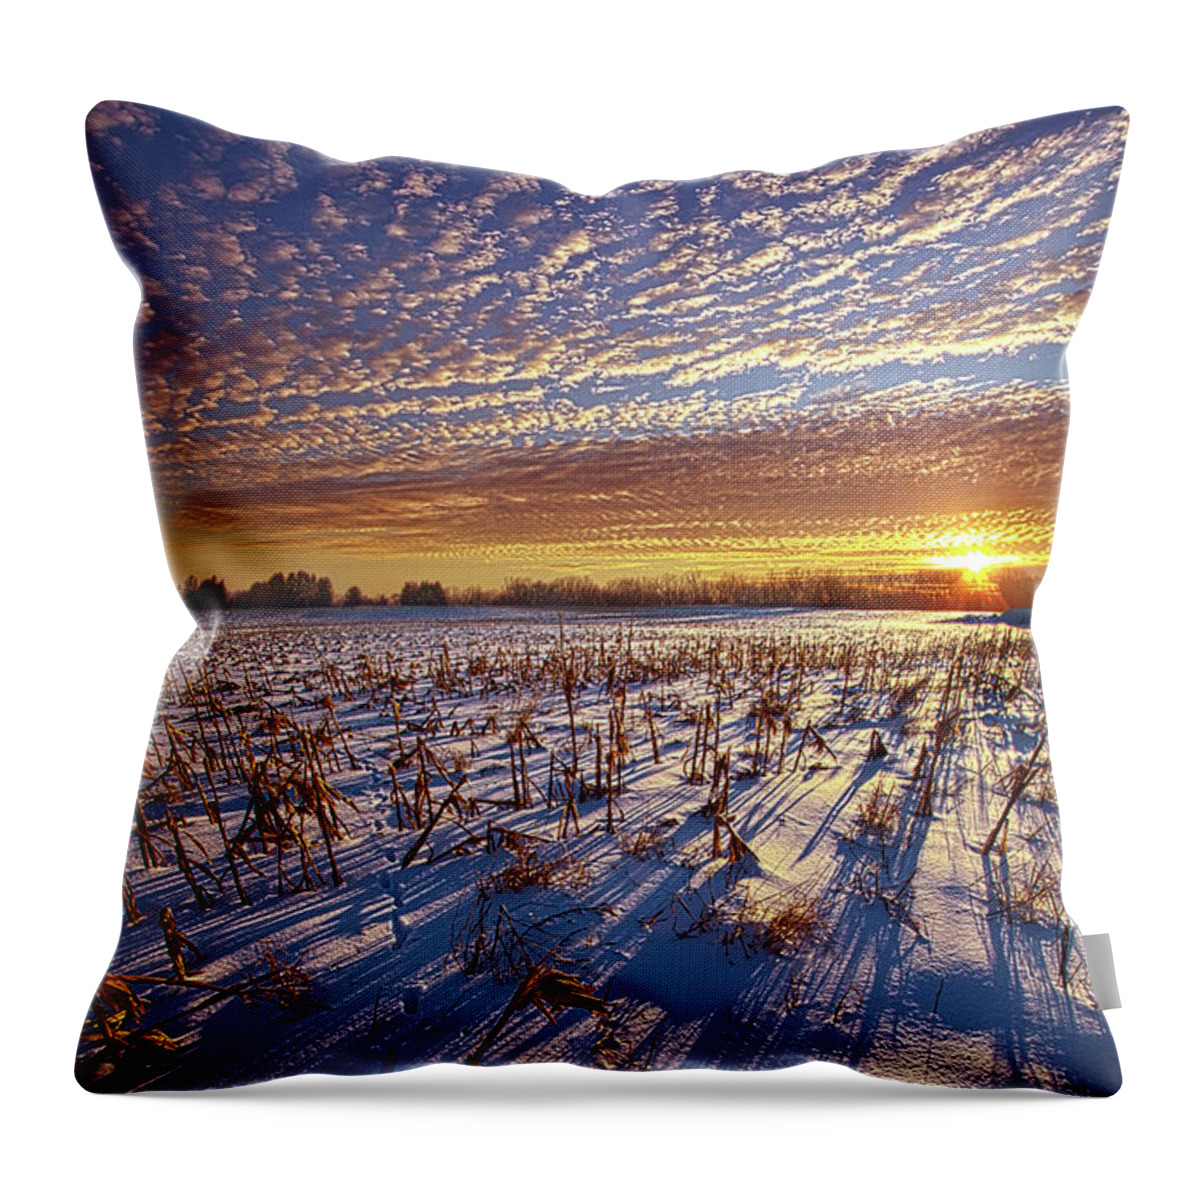 Fineart Throw Pillow featuring the photograph With Each Day by Phil Koch